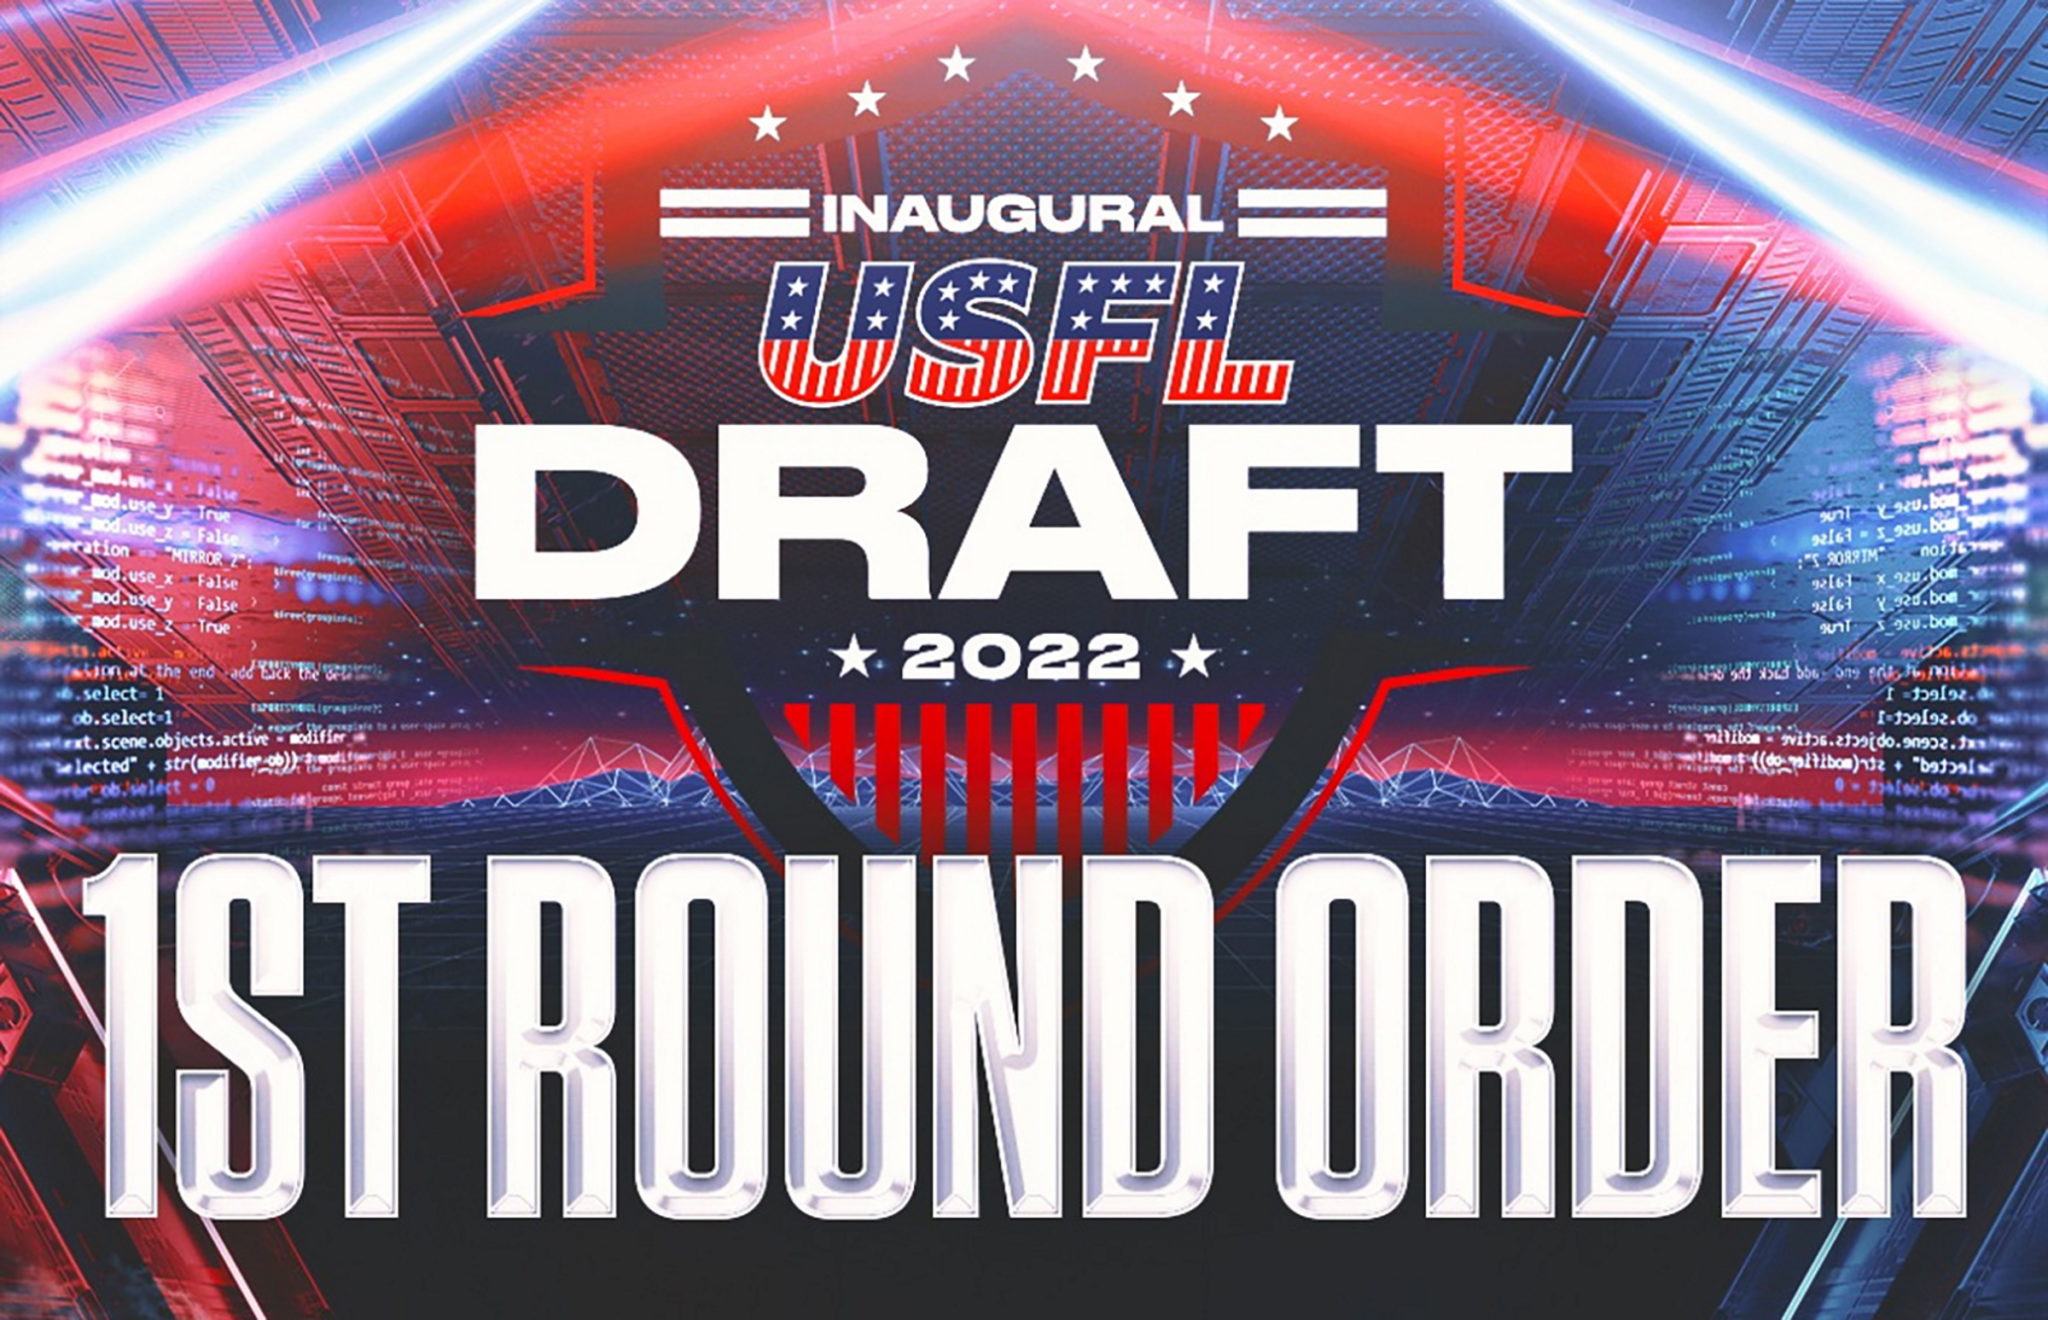 USFL Draft Order Who has 1st overall pick?